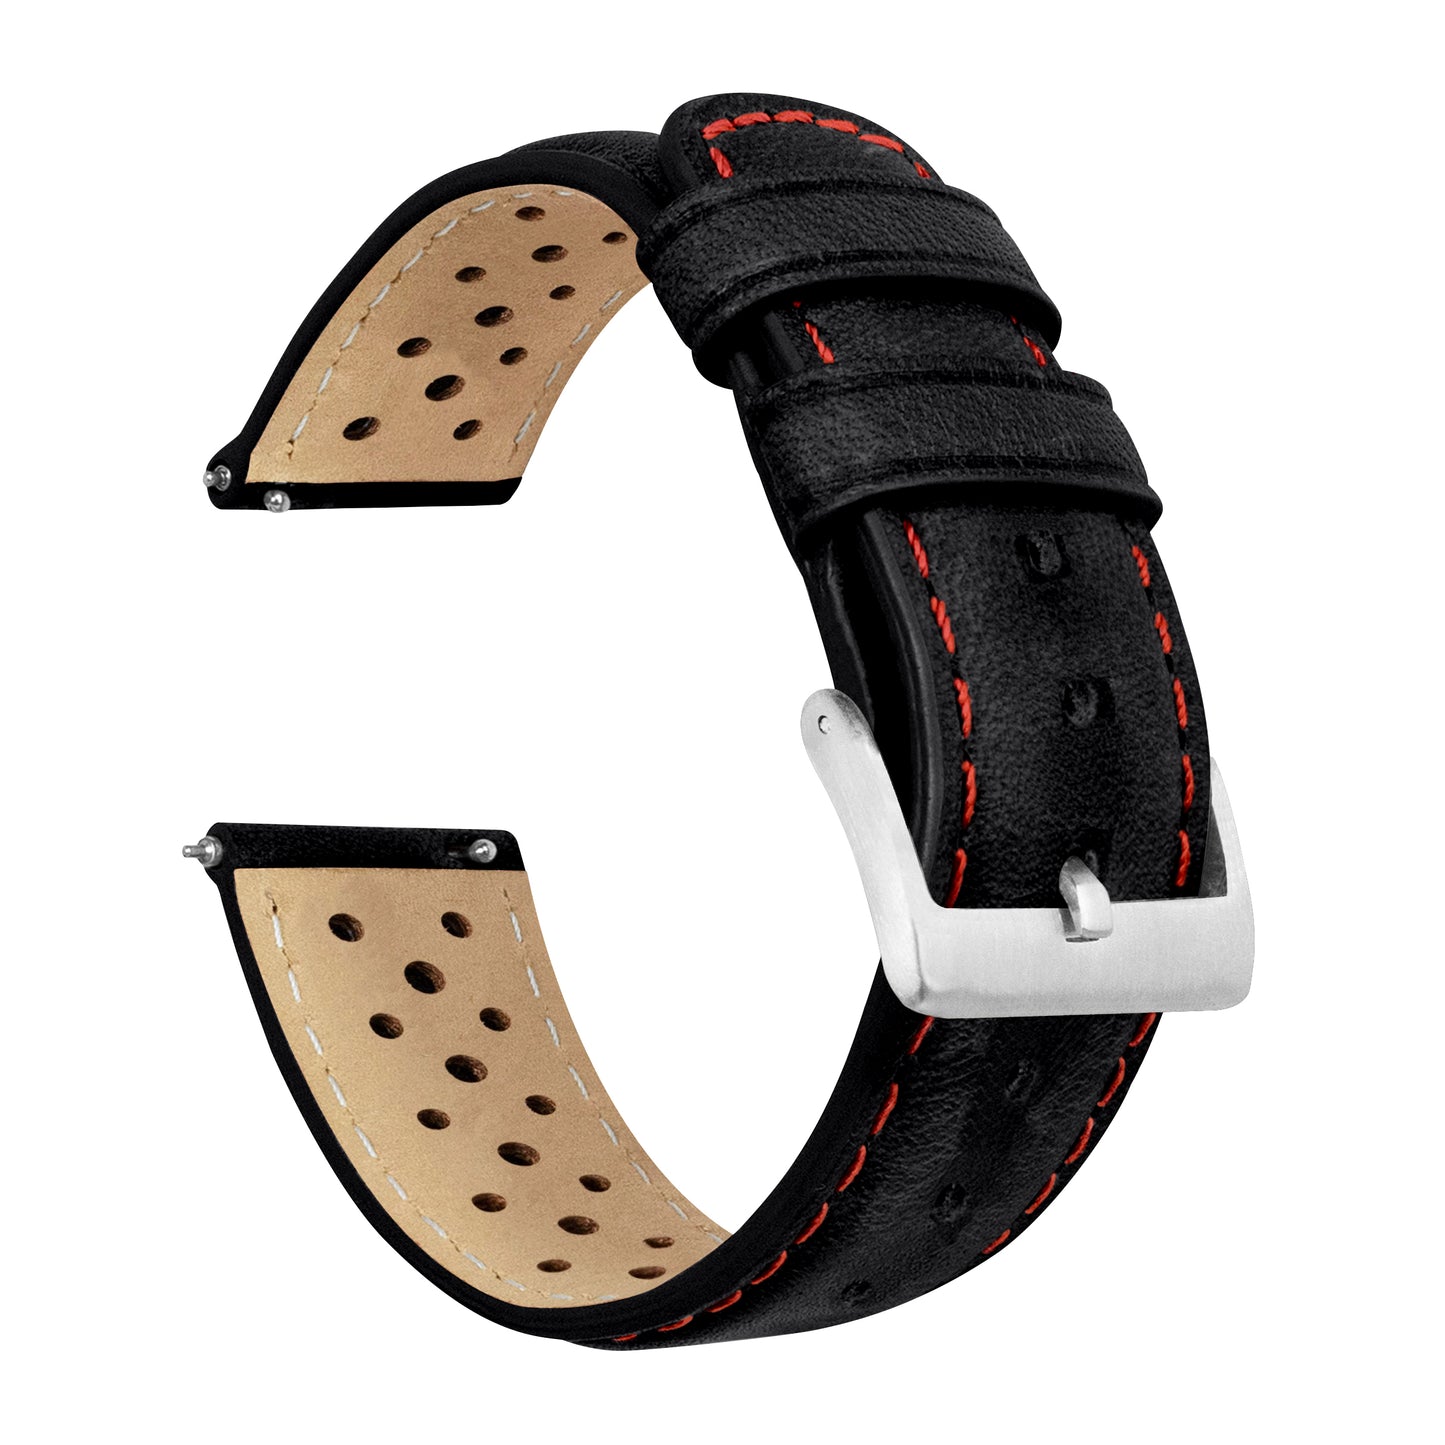 Samsung Galaxy Watch Racing Horween Leather Black Red Stitch Watch Band